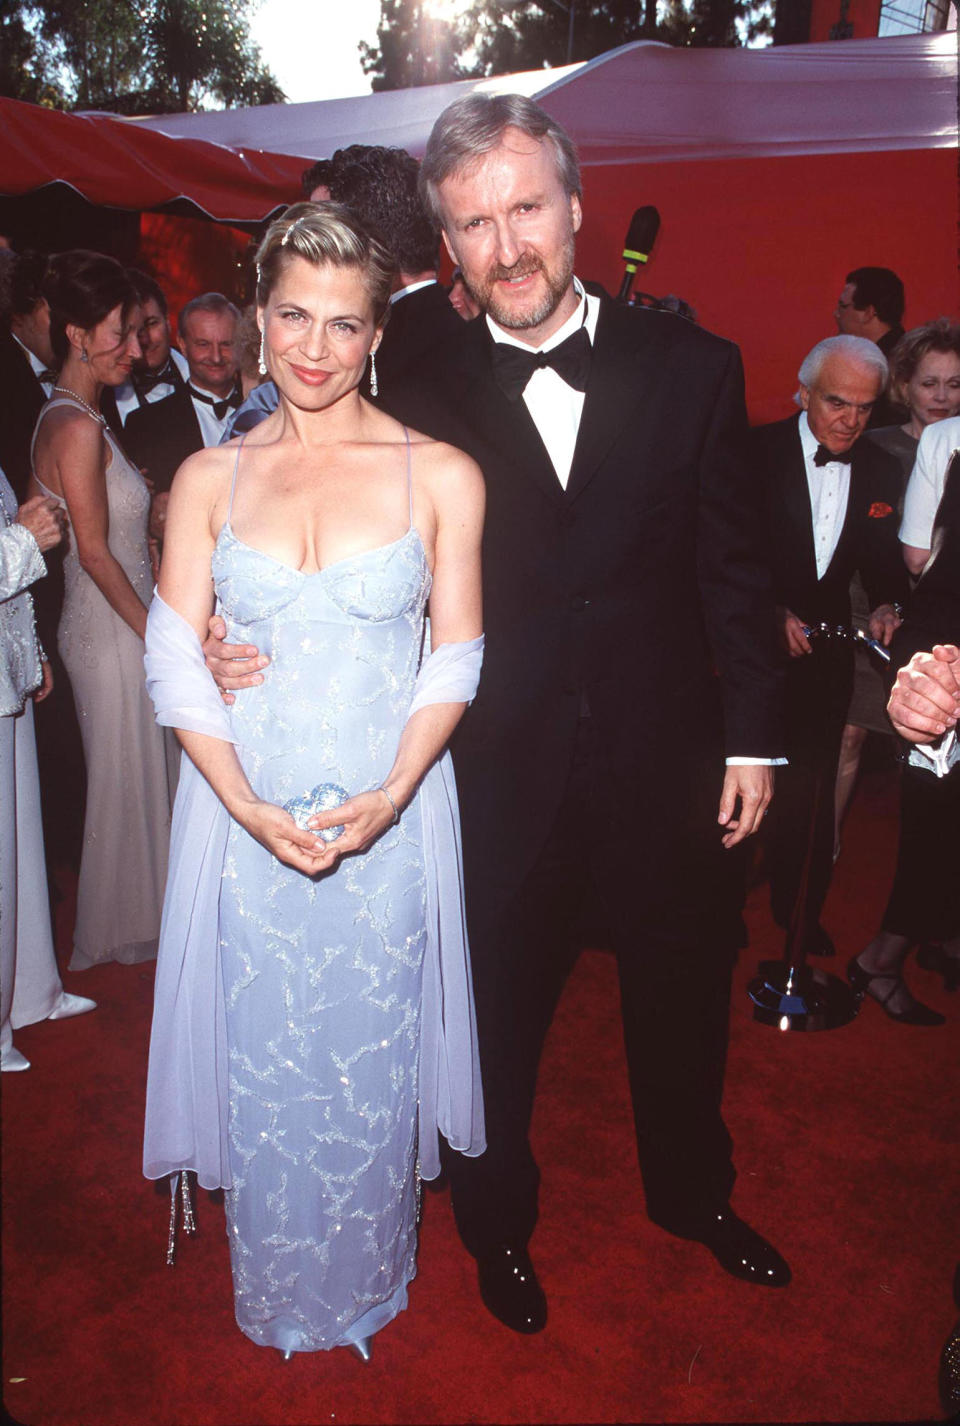 James Cameron and Linda Hamilton attend The 70th Annual Academy Awards together. (Photo: SGranitz via Getty Images)